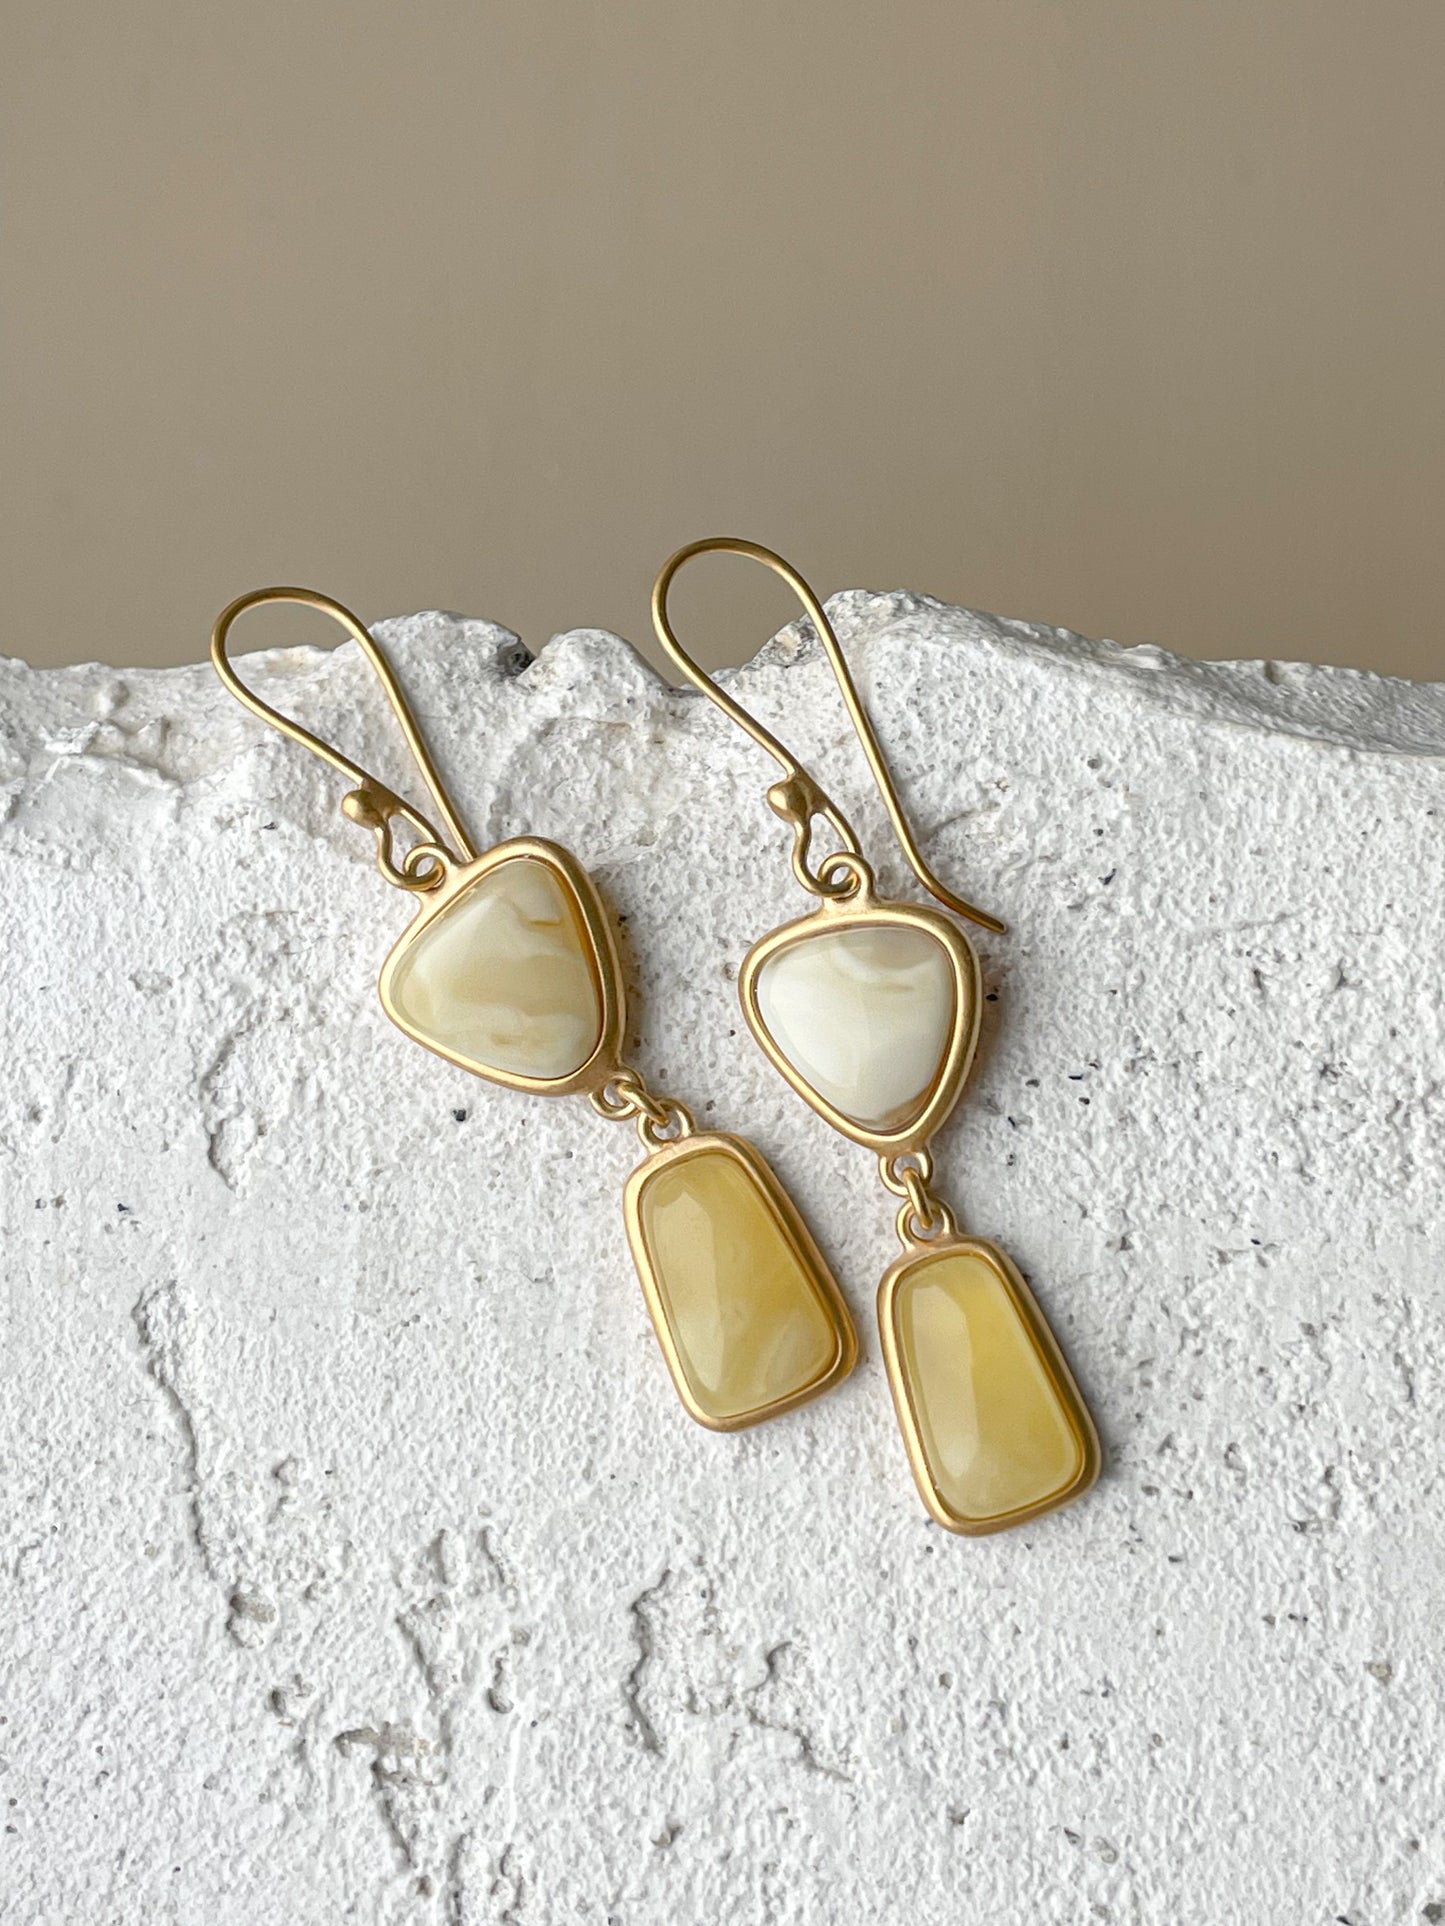 Amber dangle earrings - Gold plated silver - Multicolor earrings collection